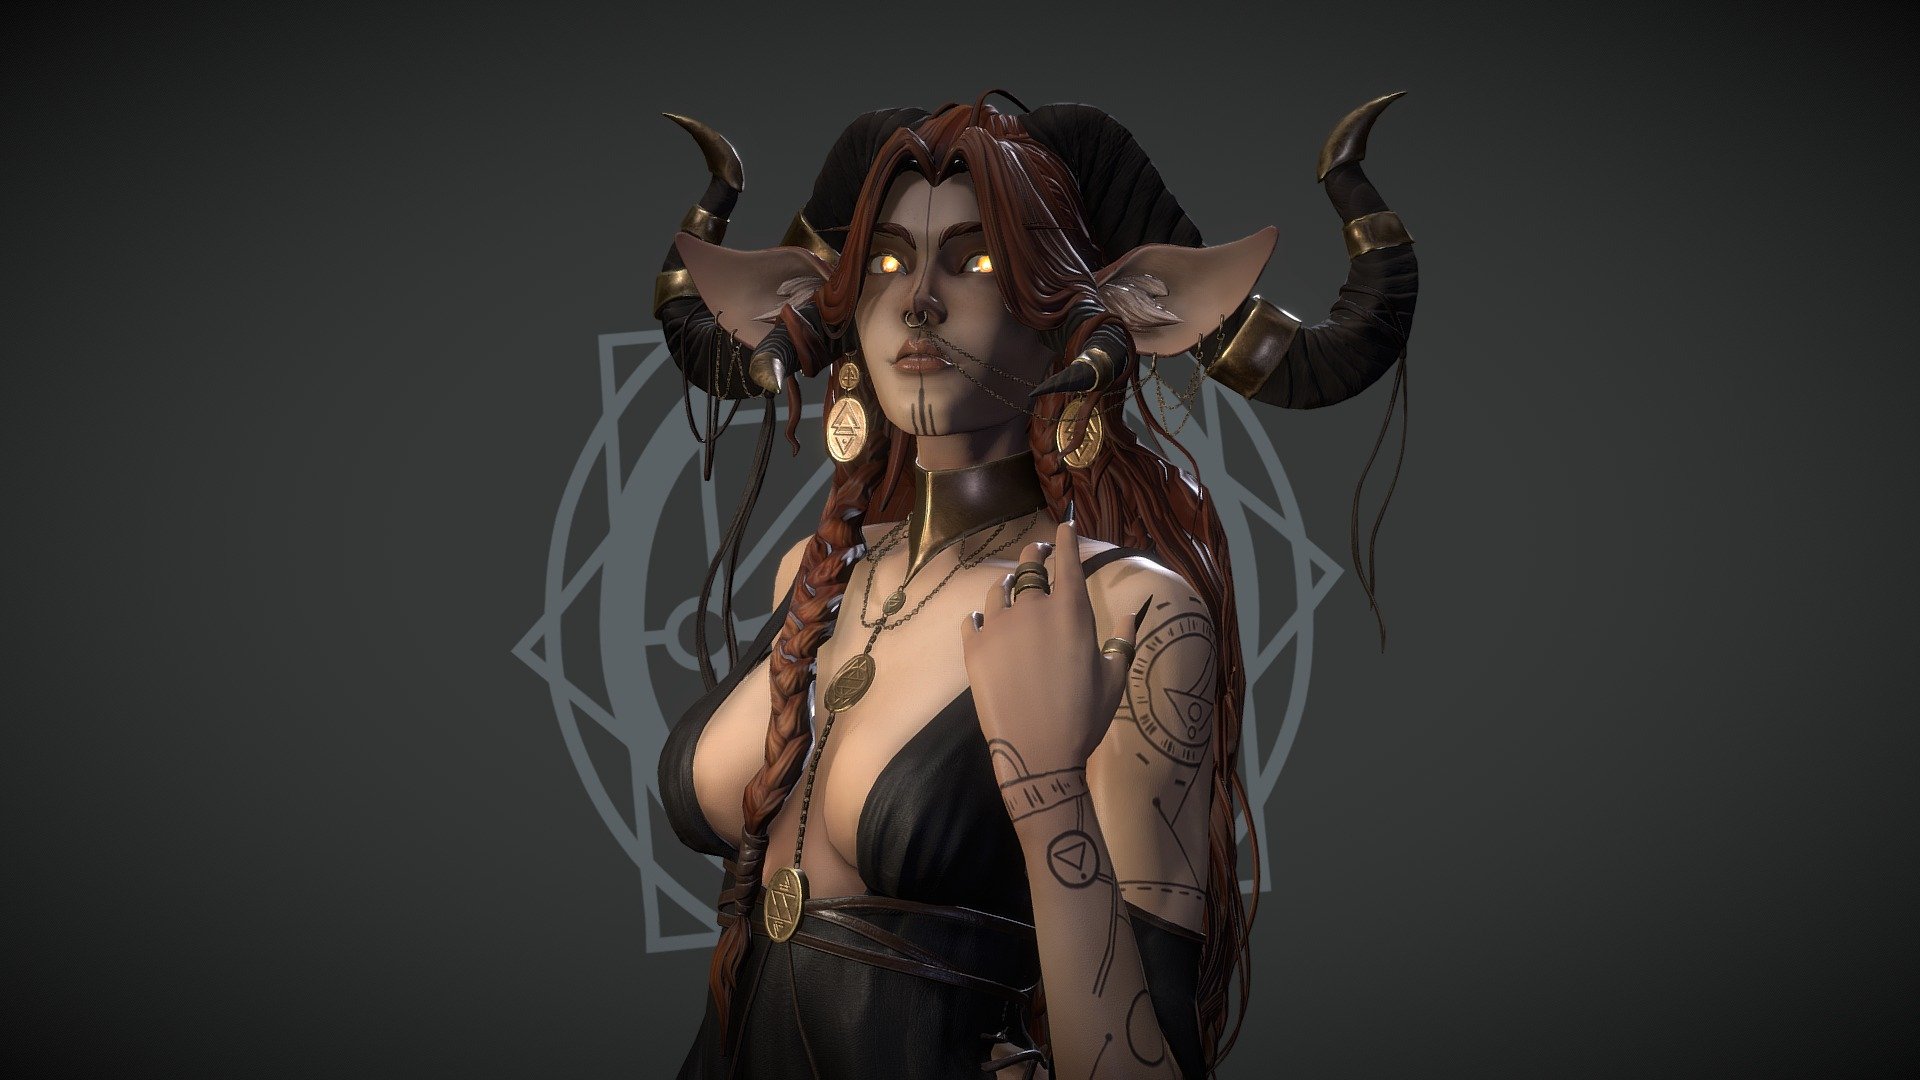 This is my 3D interpretation of the beautiful character concept done by Isabell Bartnicki
https://www.artstation.com/artwork/48Woxk - Ceridwen - Faun Sourceress - 3D model by Sina Ladage (@SinaLadage) 3d model